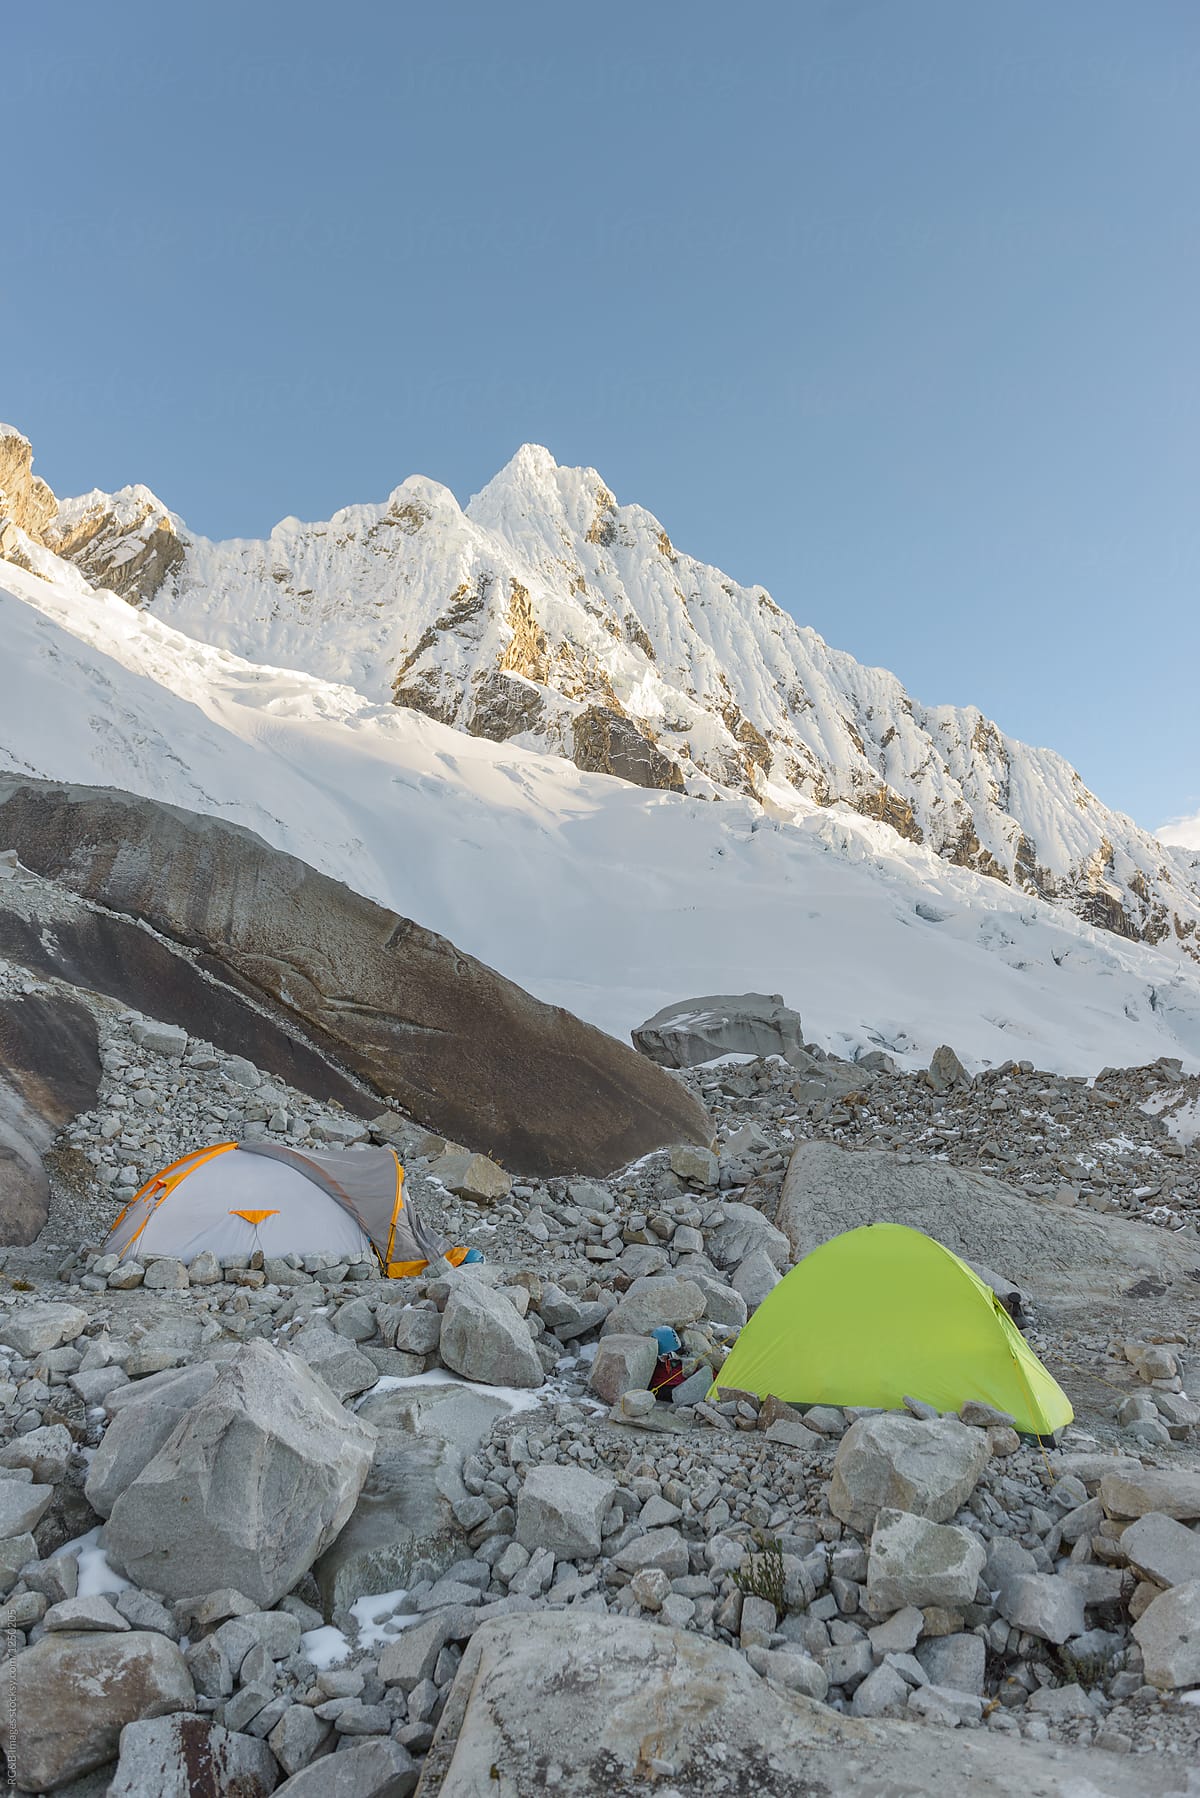 Camping tents at the base of the mountain